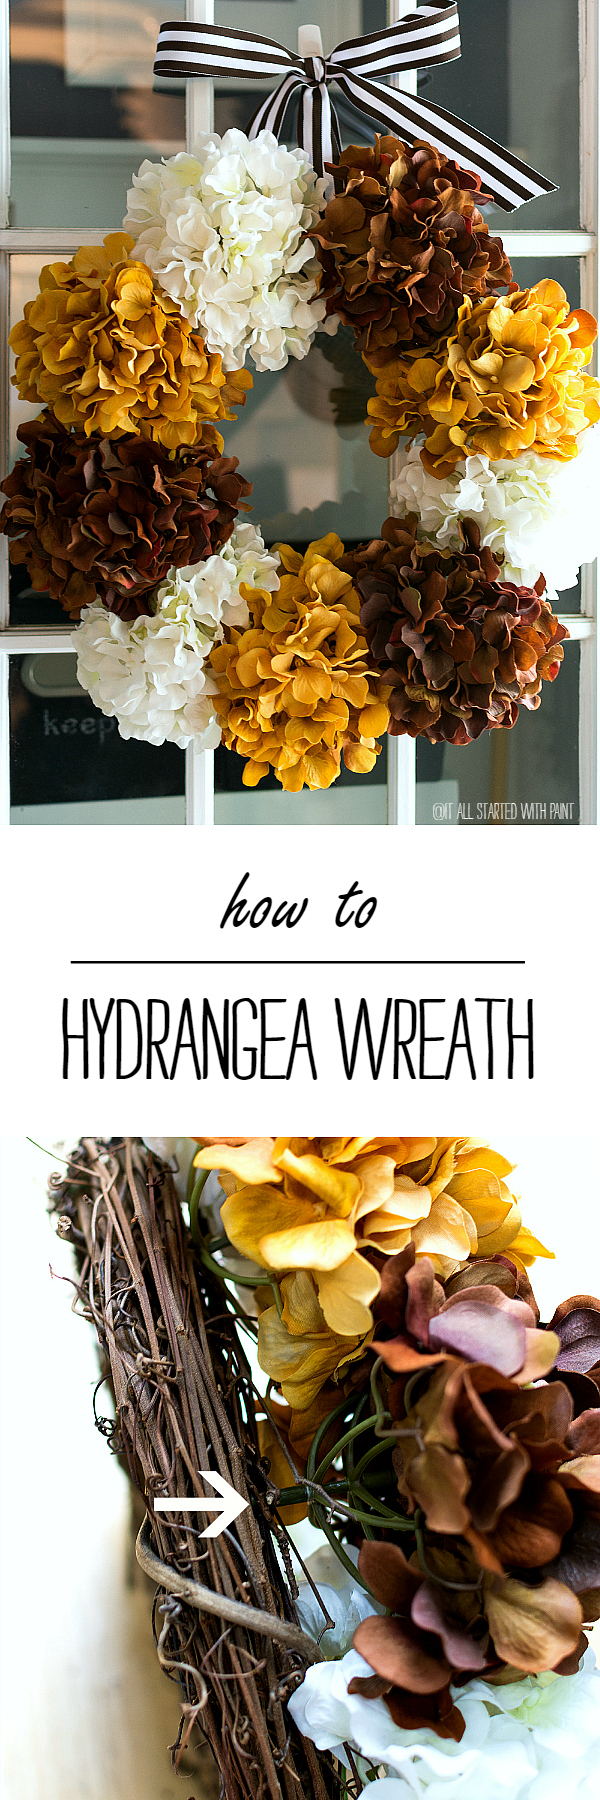 How To Make A Hydrangea Wreath for Fall